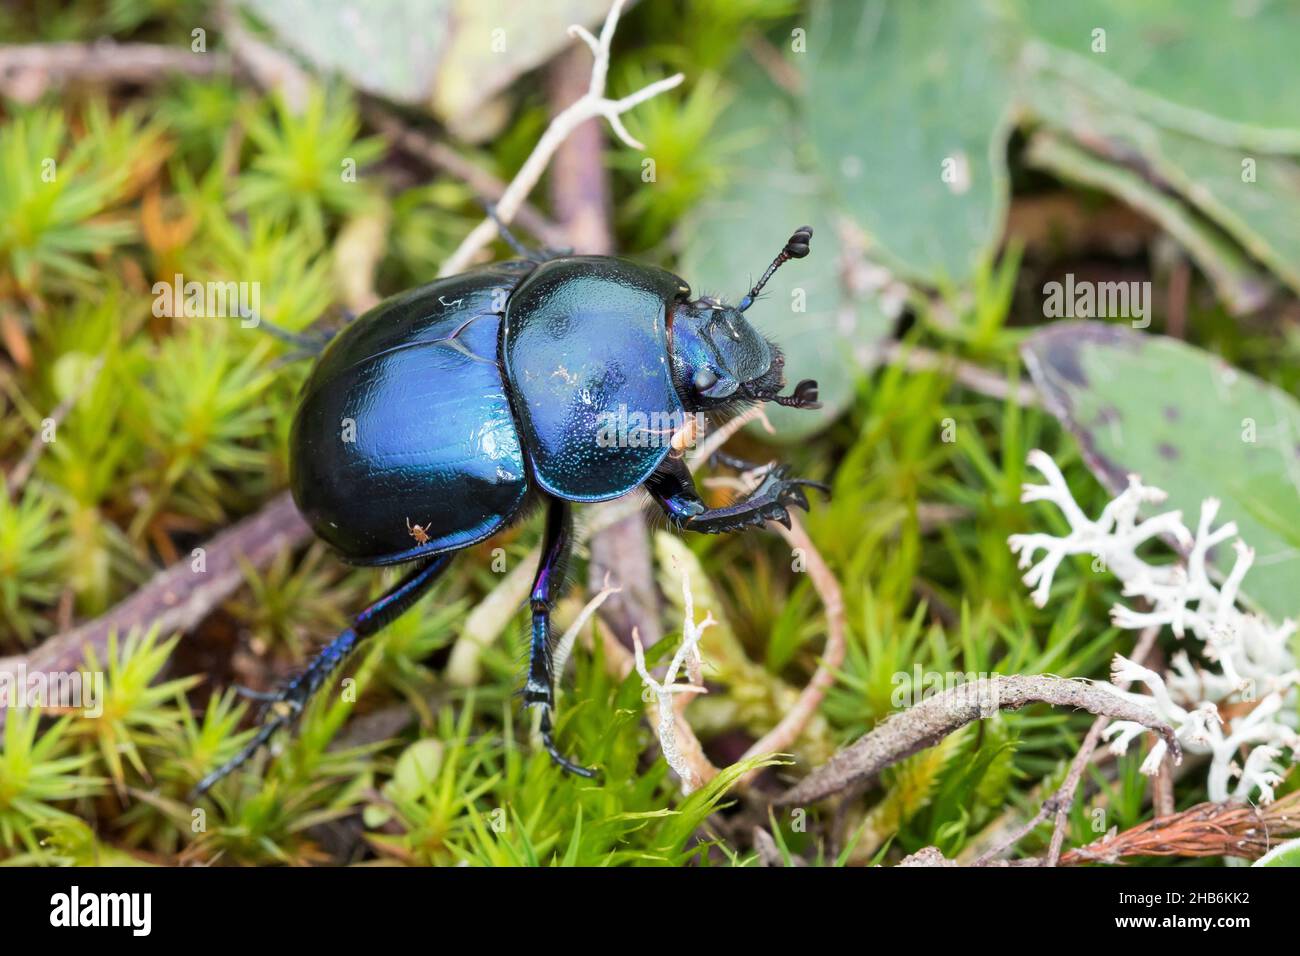 Springtime dung beetle (Geotrupes vernalis, Trypocopris vernalis), crawling on moss, Germany Stock Photo